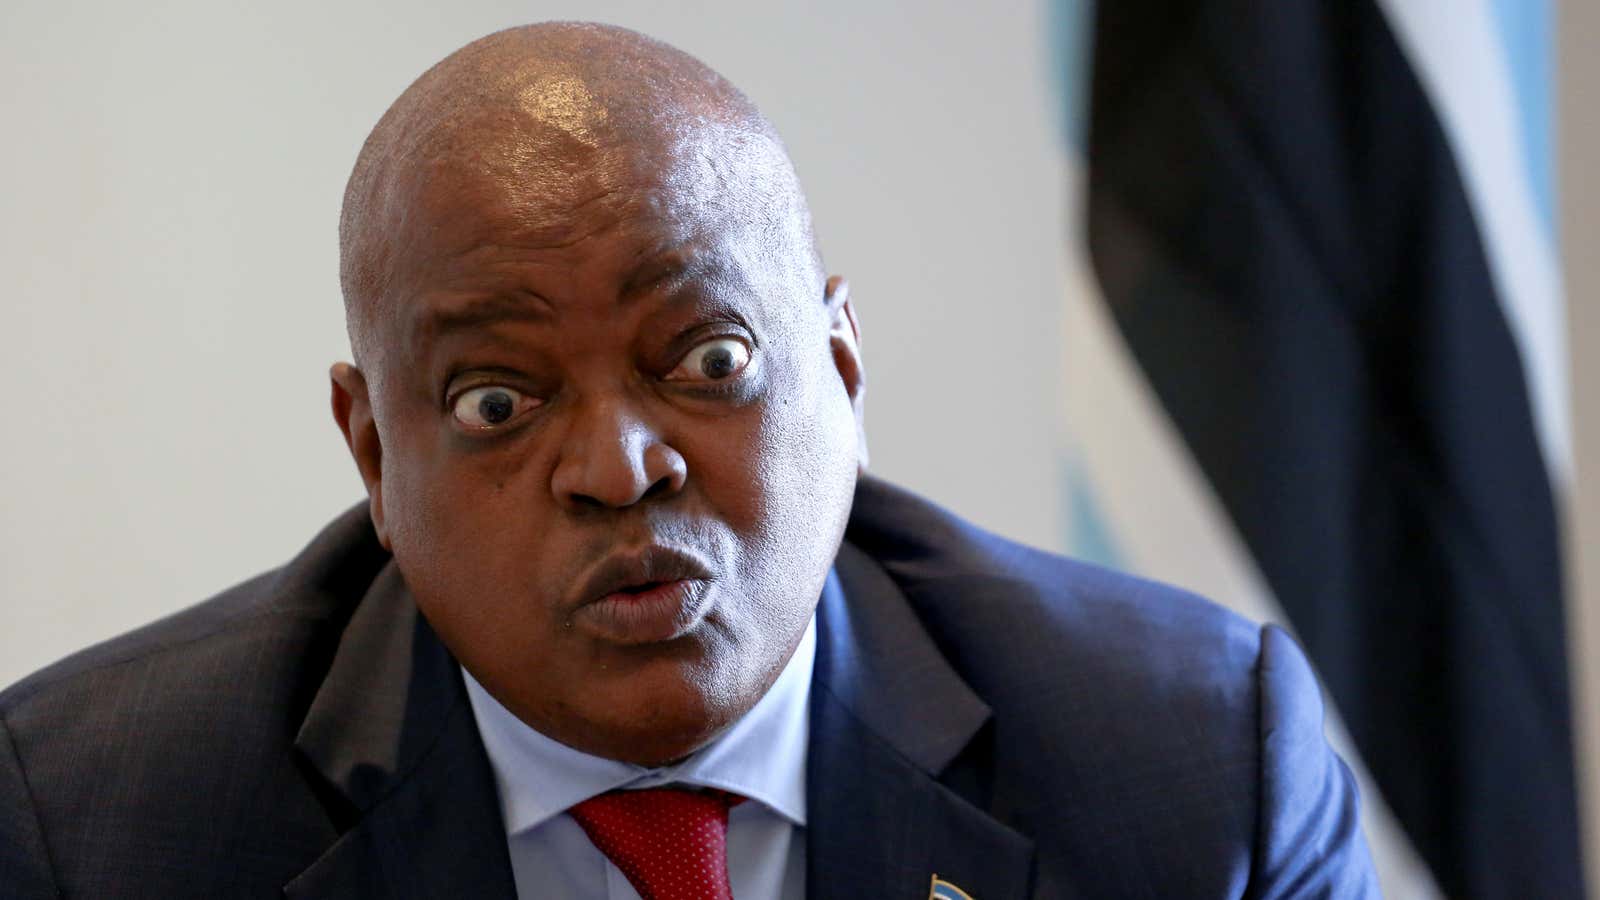 Botswana president Mokgweetsi Masisi said at COP27 that nations &quot;are racing against time&quot; to address climate adaptation.